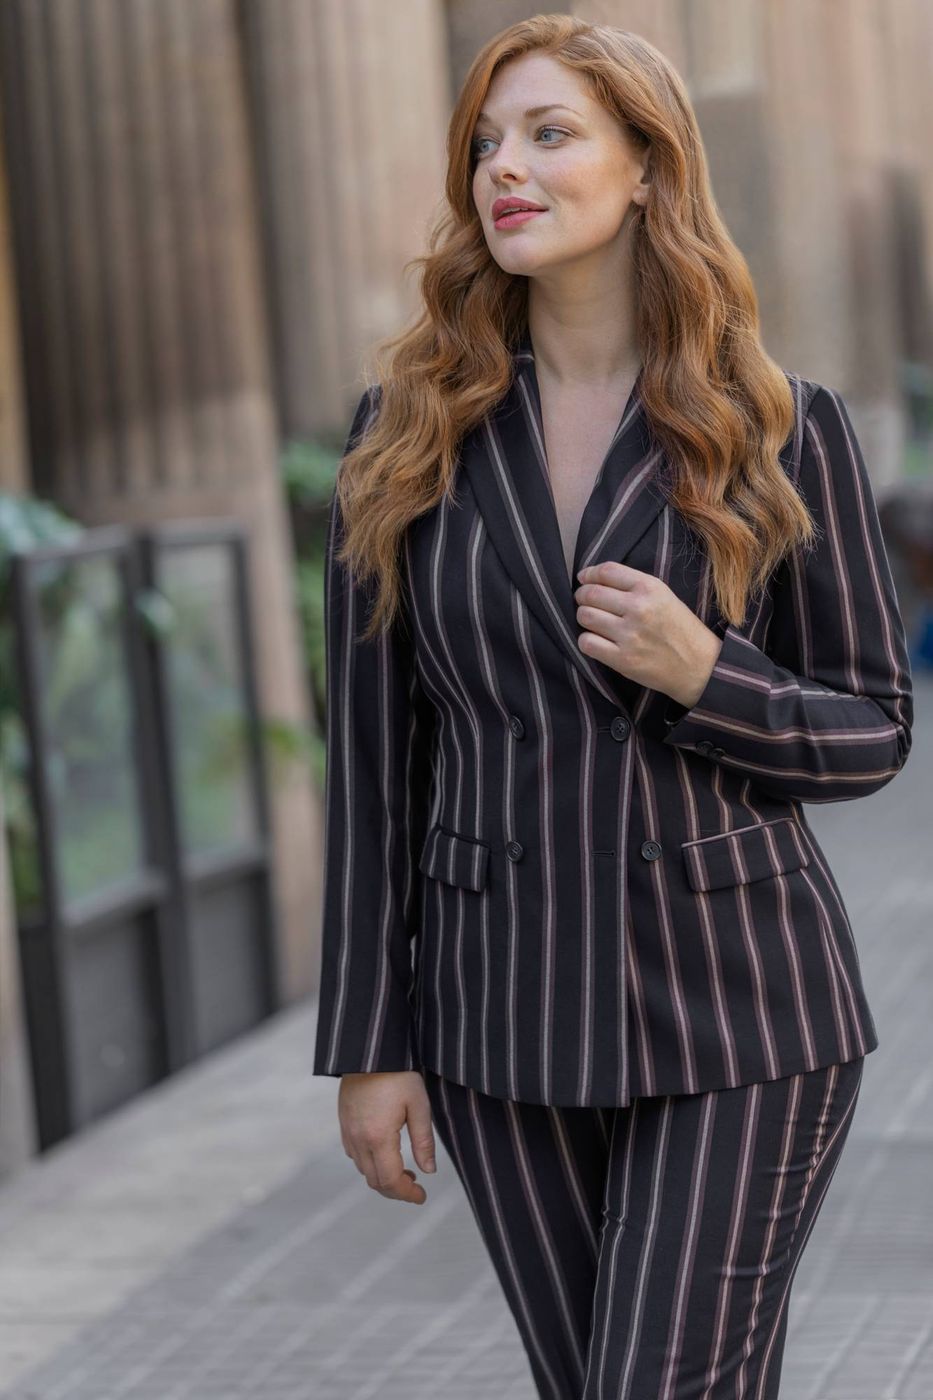 Striped Women's Pantsuit for the Office